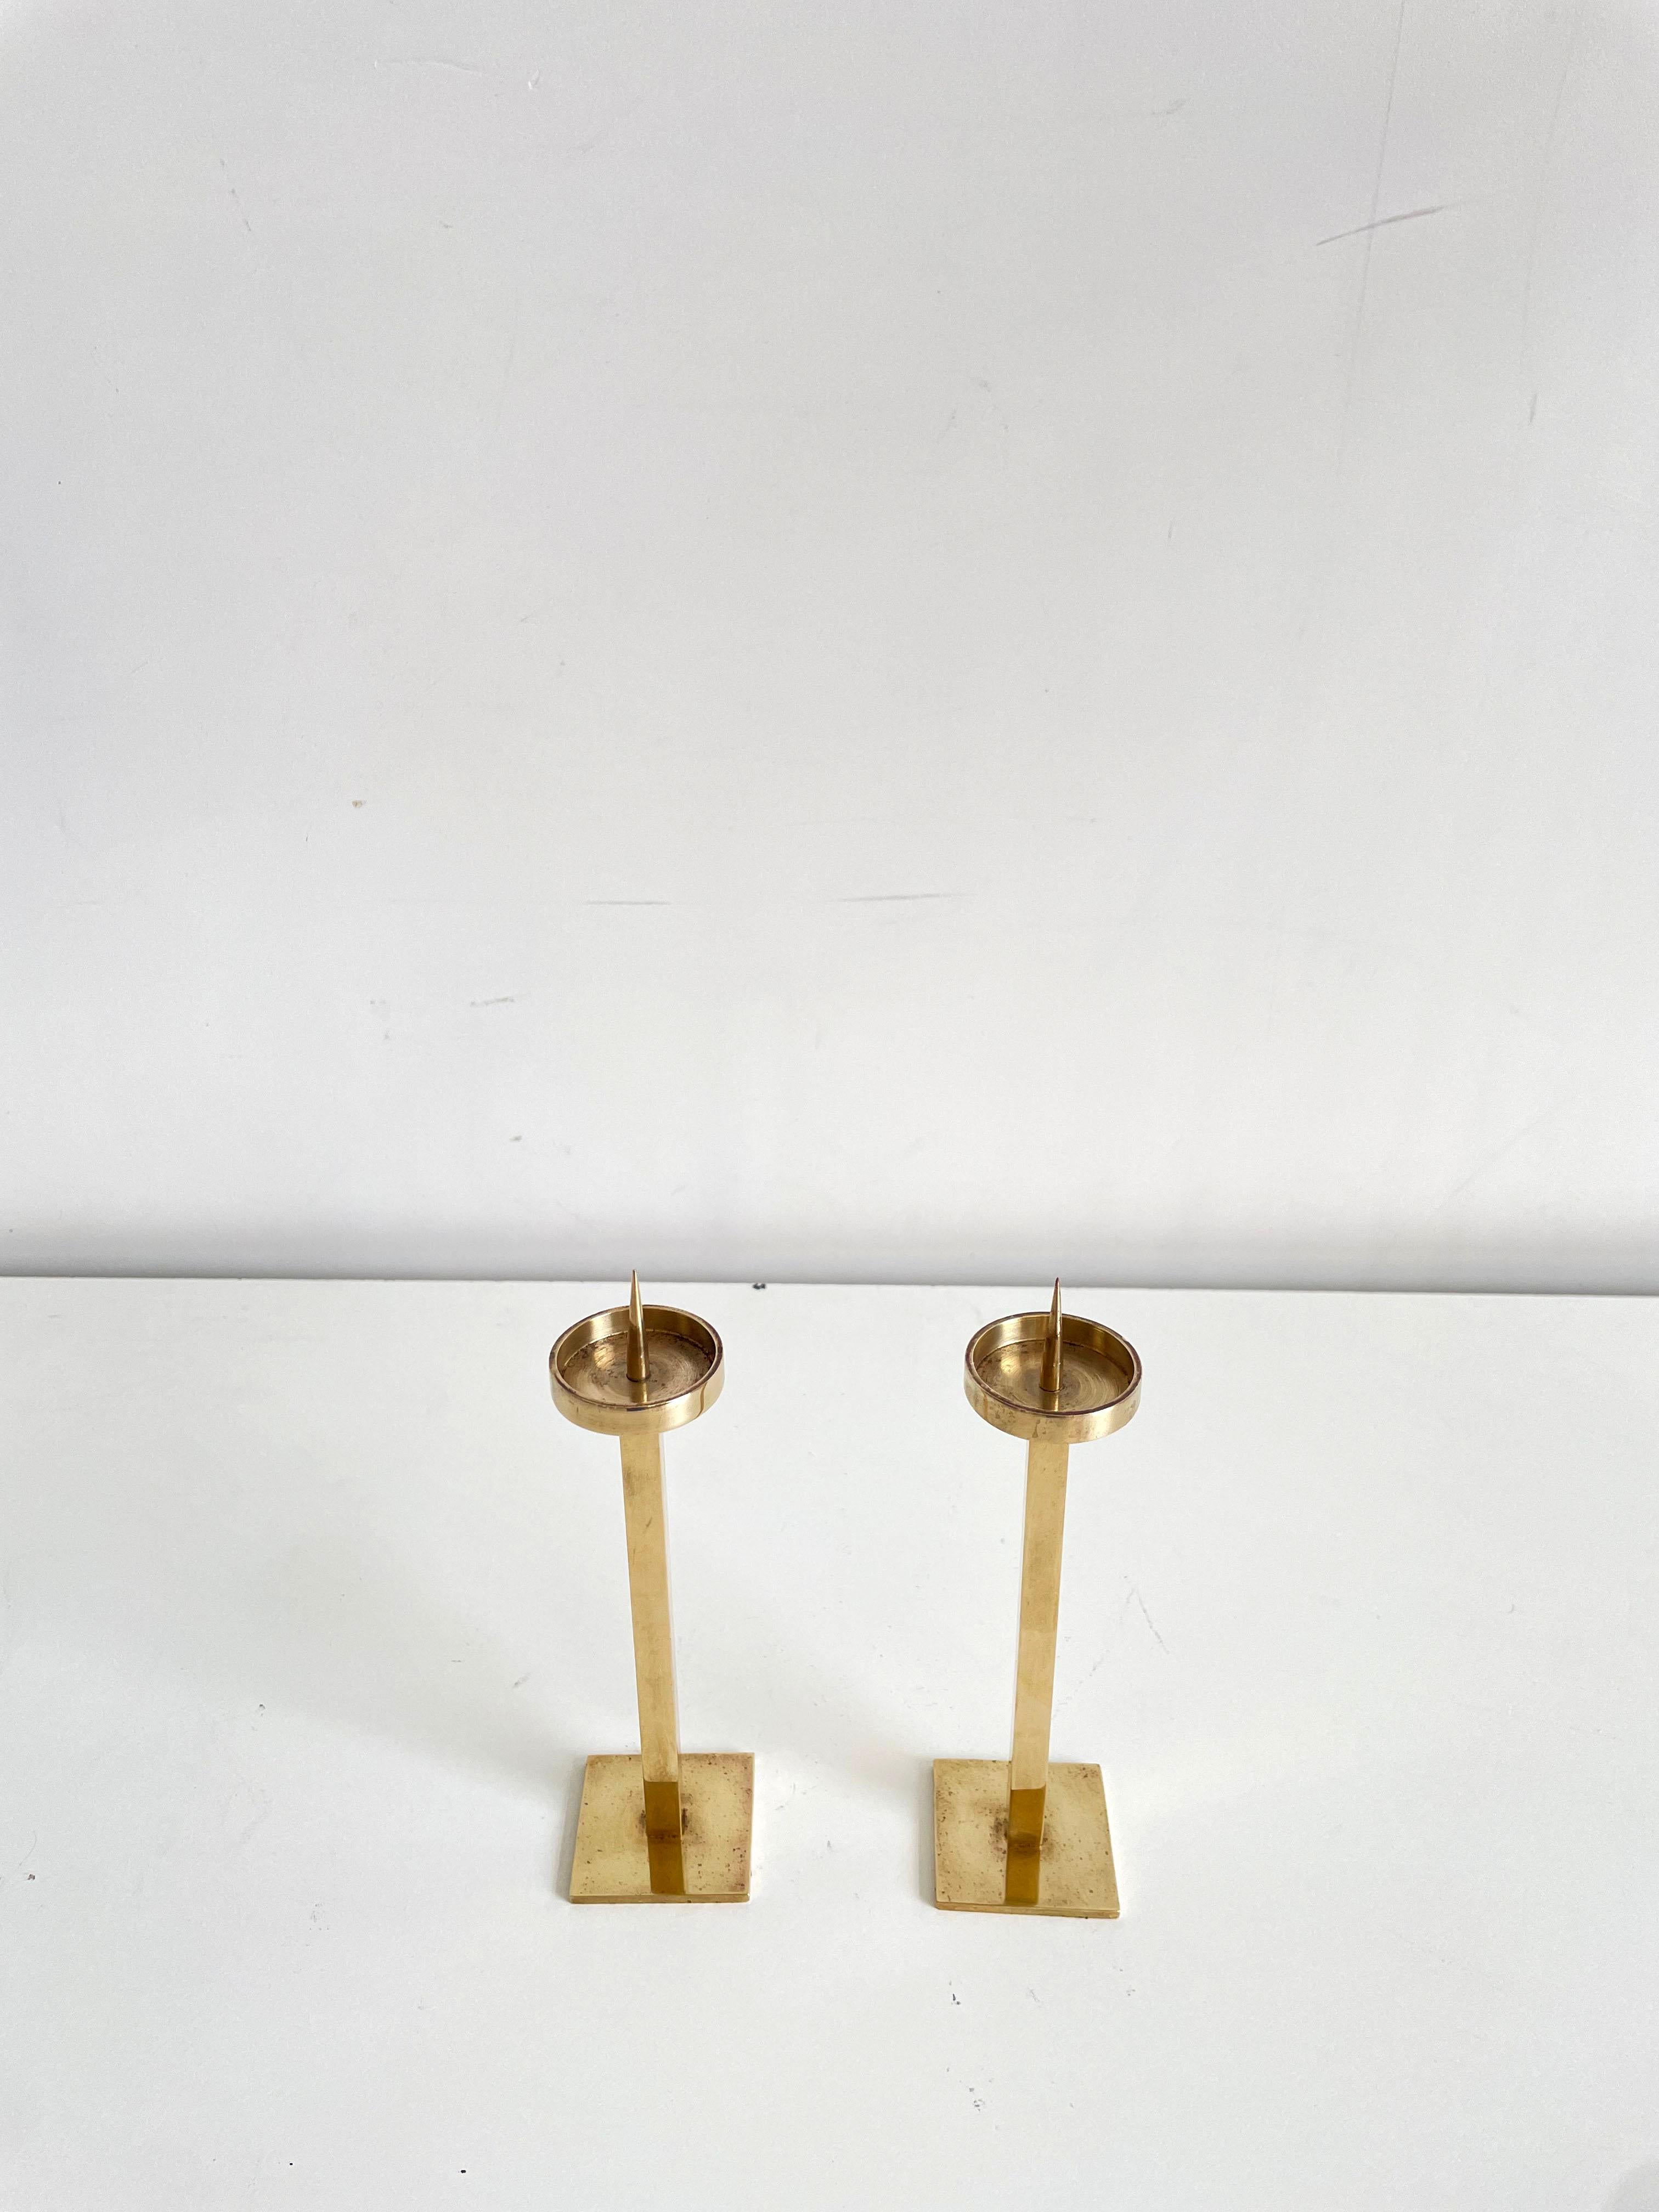 Pair of Very Elegant Mid-century Minimalist Brass Candlestick Holders In Good Condition For Sale In Zagreb, HR